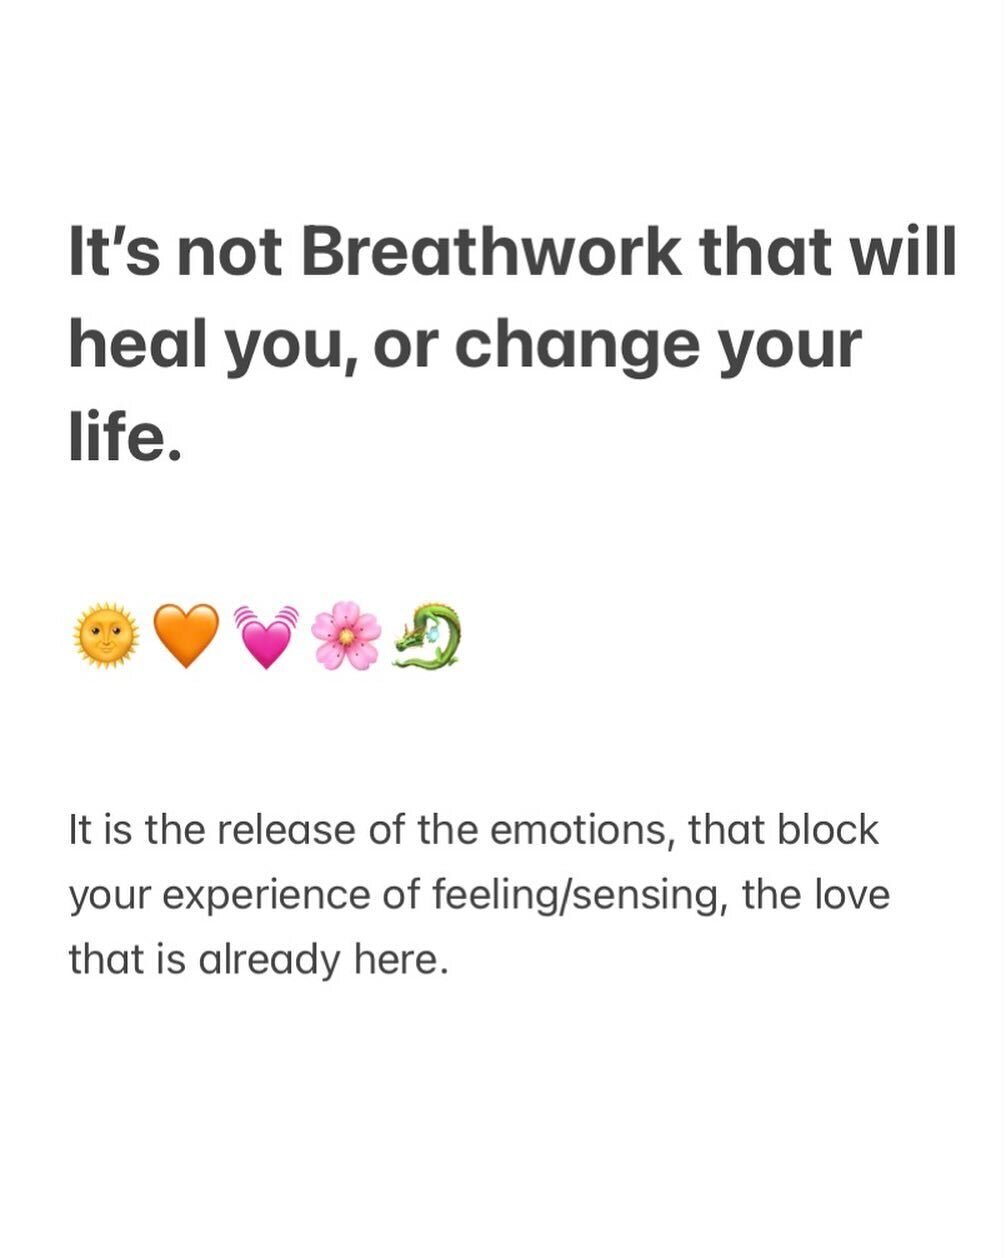 Breathwork is a tool, that guides the parts of you that feel unworthy of love, towards your heart.